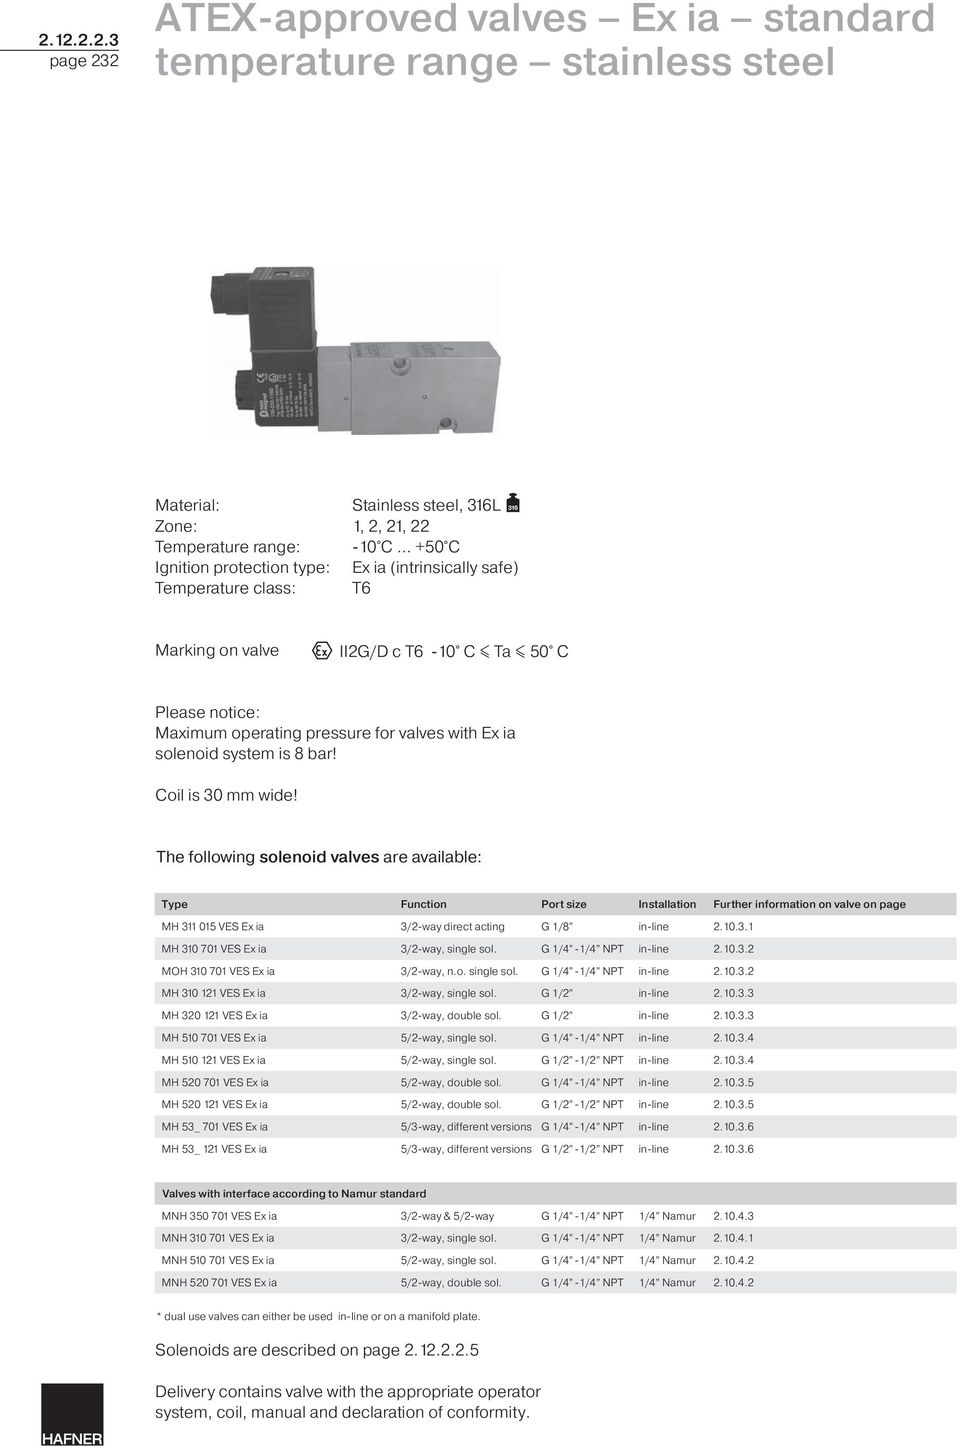 Type Function Port size Installation Further information on valve on page MH 311 015 VES Ex ia 3/2-way direct acting G 1/8 in-line 2.10.3.1 MH 310 701 VES Ex ia 3/2-way, single sol.